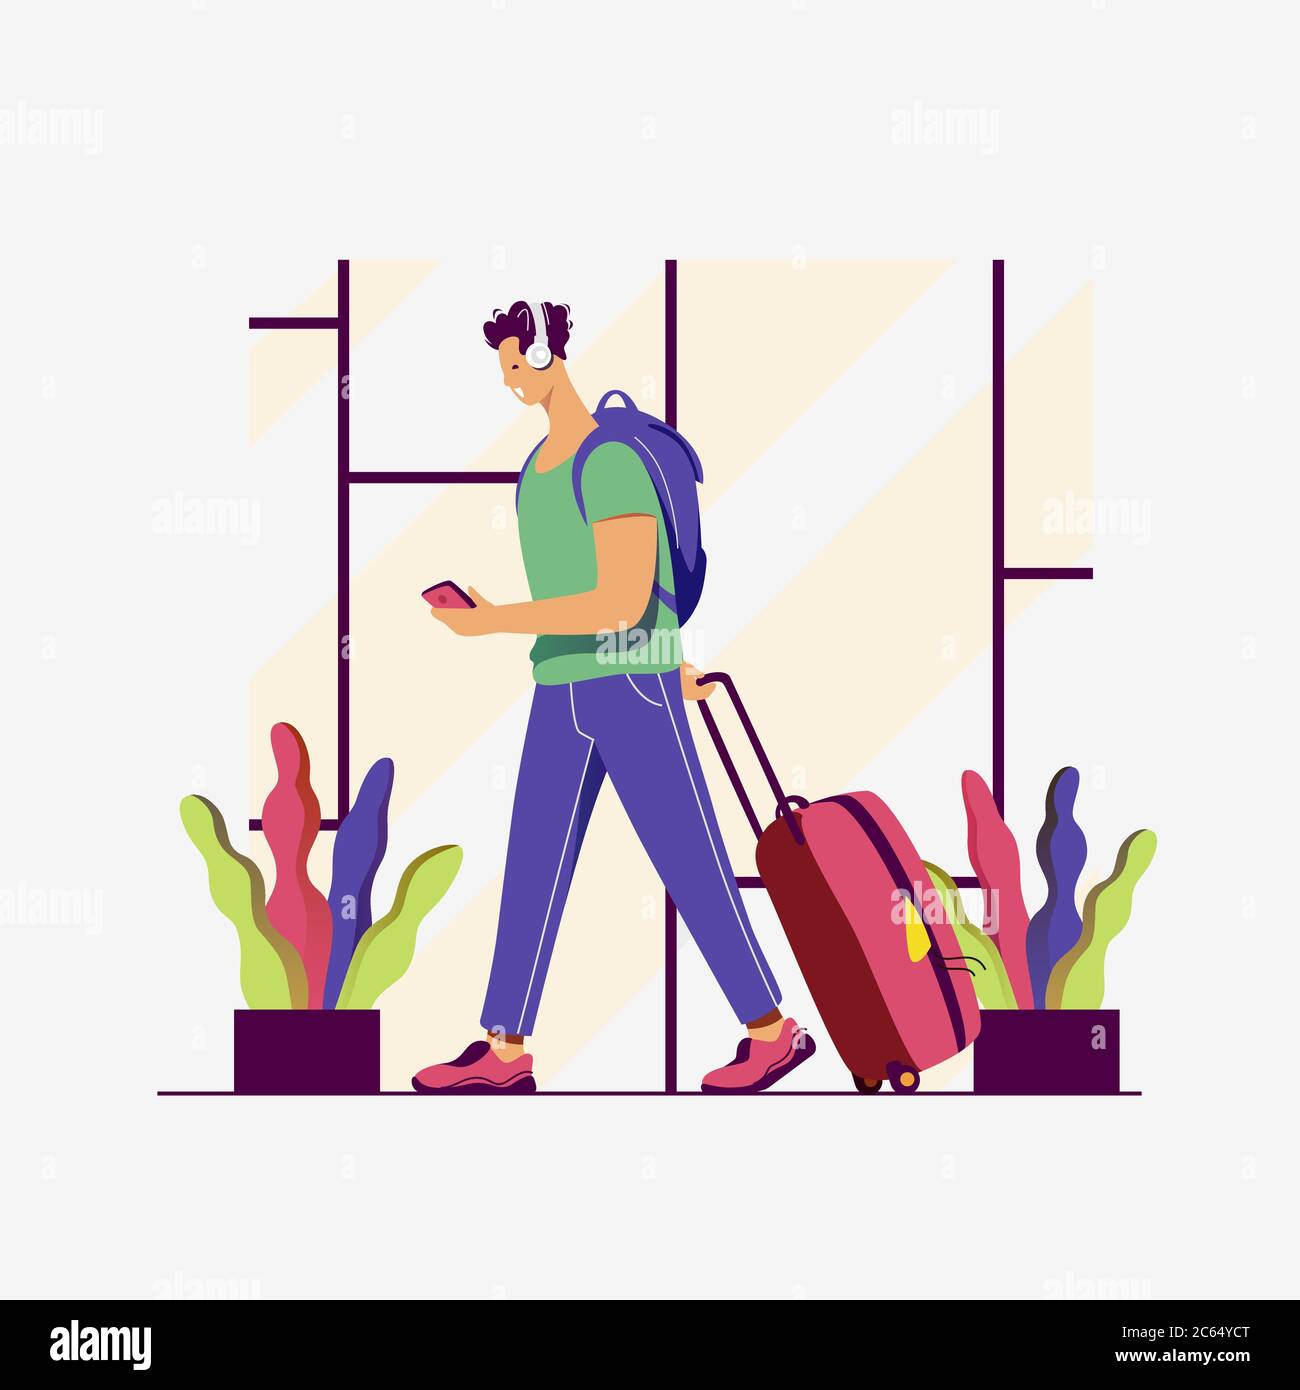 A Treveller in an airport. Around the world. Stock Vector